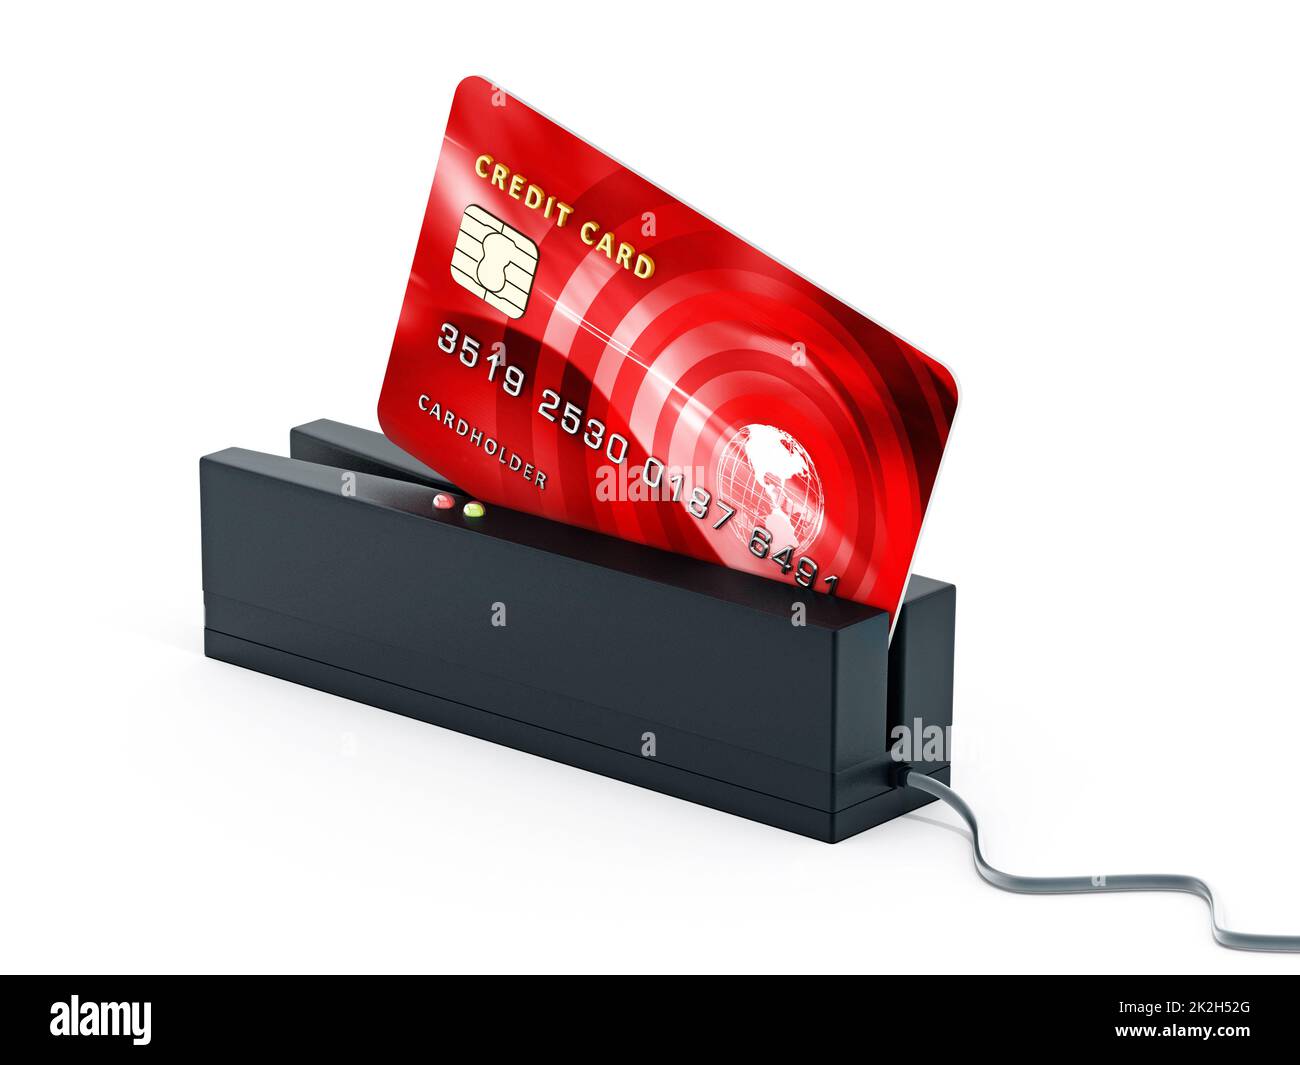 Red credit card on POS terminal. 3D illustration Stock Photo